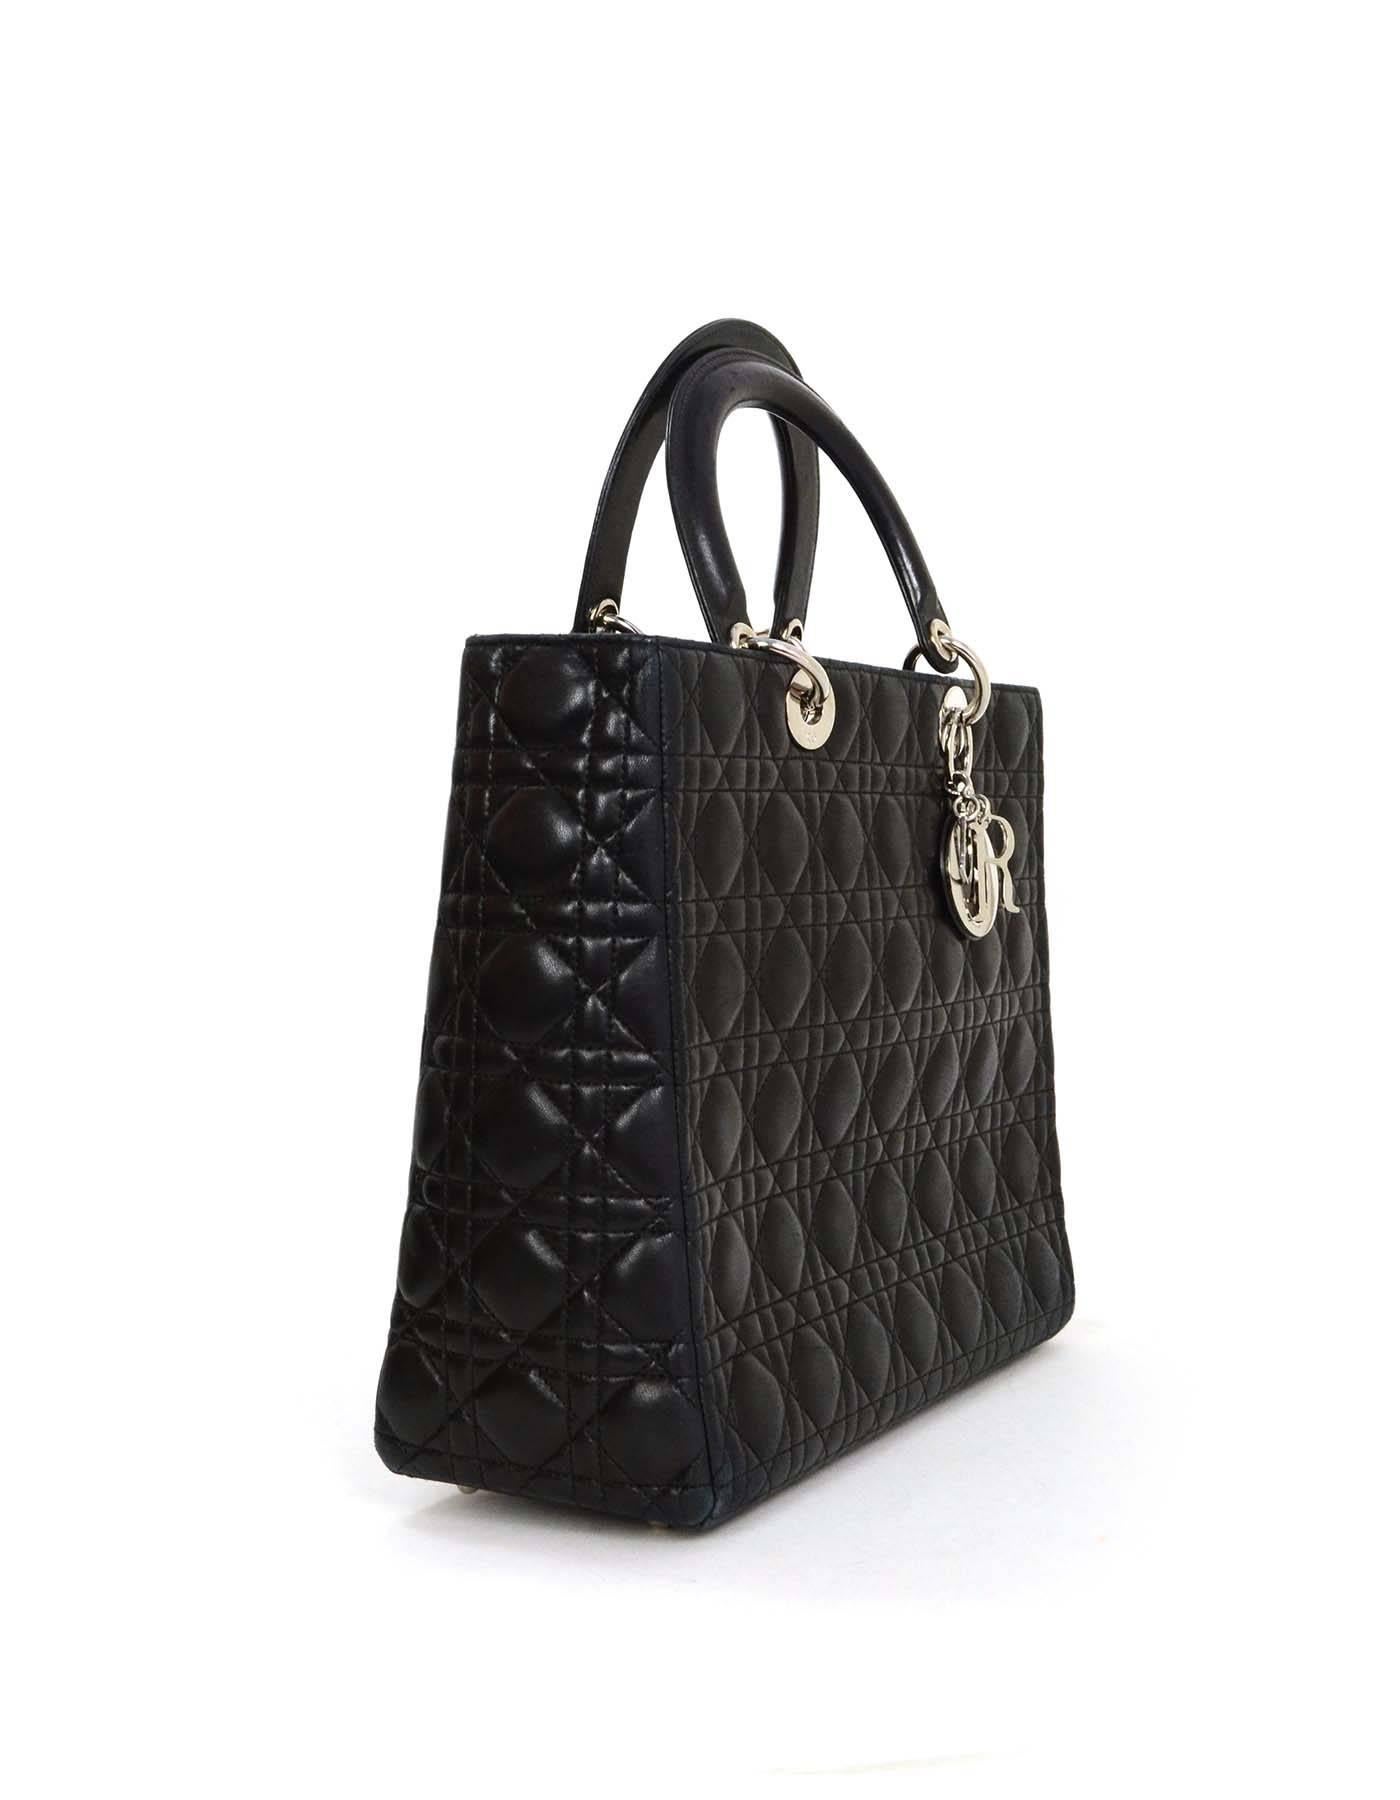 Christian Dior Black Large Lady Dior Tote 
Features optional shoulder/crossbody strap and the Christian Dior charms at handle
Made In: Italy
Color: Black
Hardware: Silvertone
Materials: Leather
Lining: Red satin-blend textile
Closure/Opening: